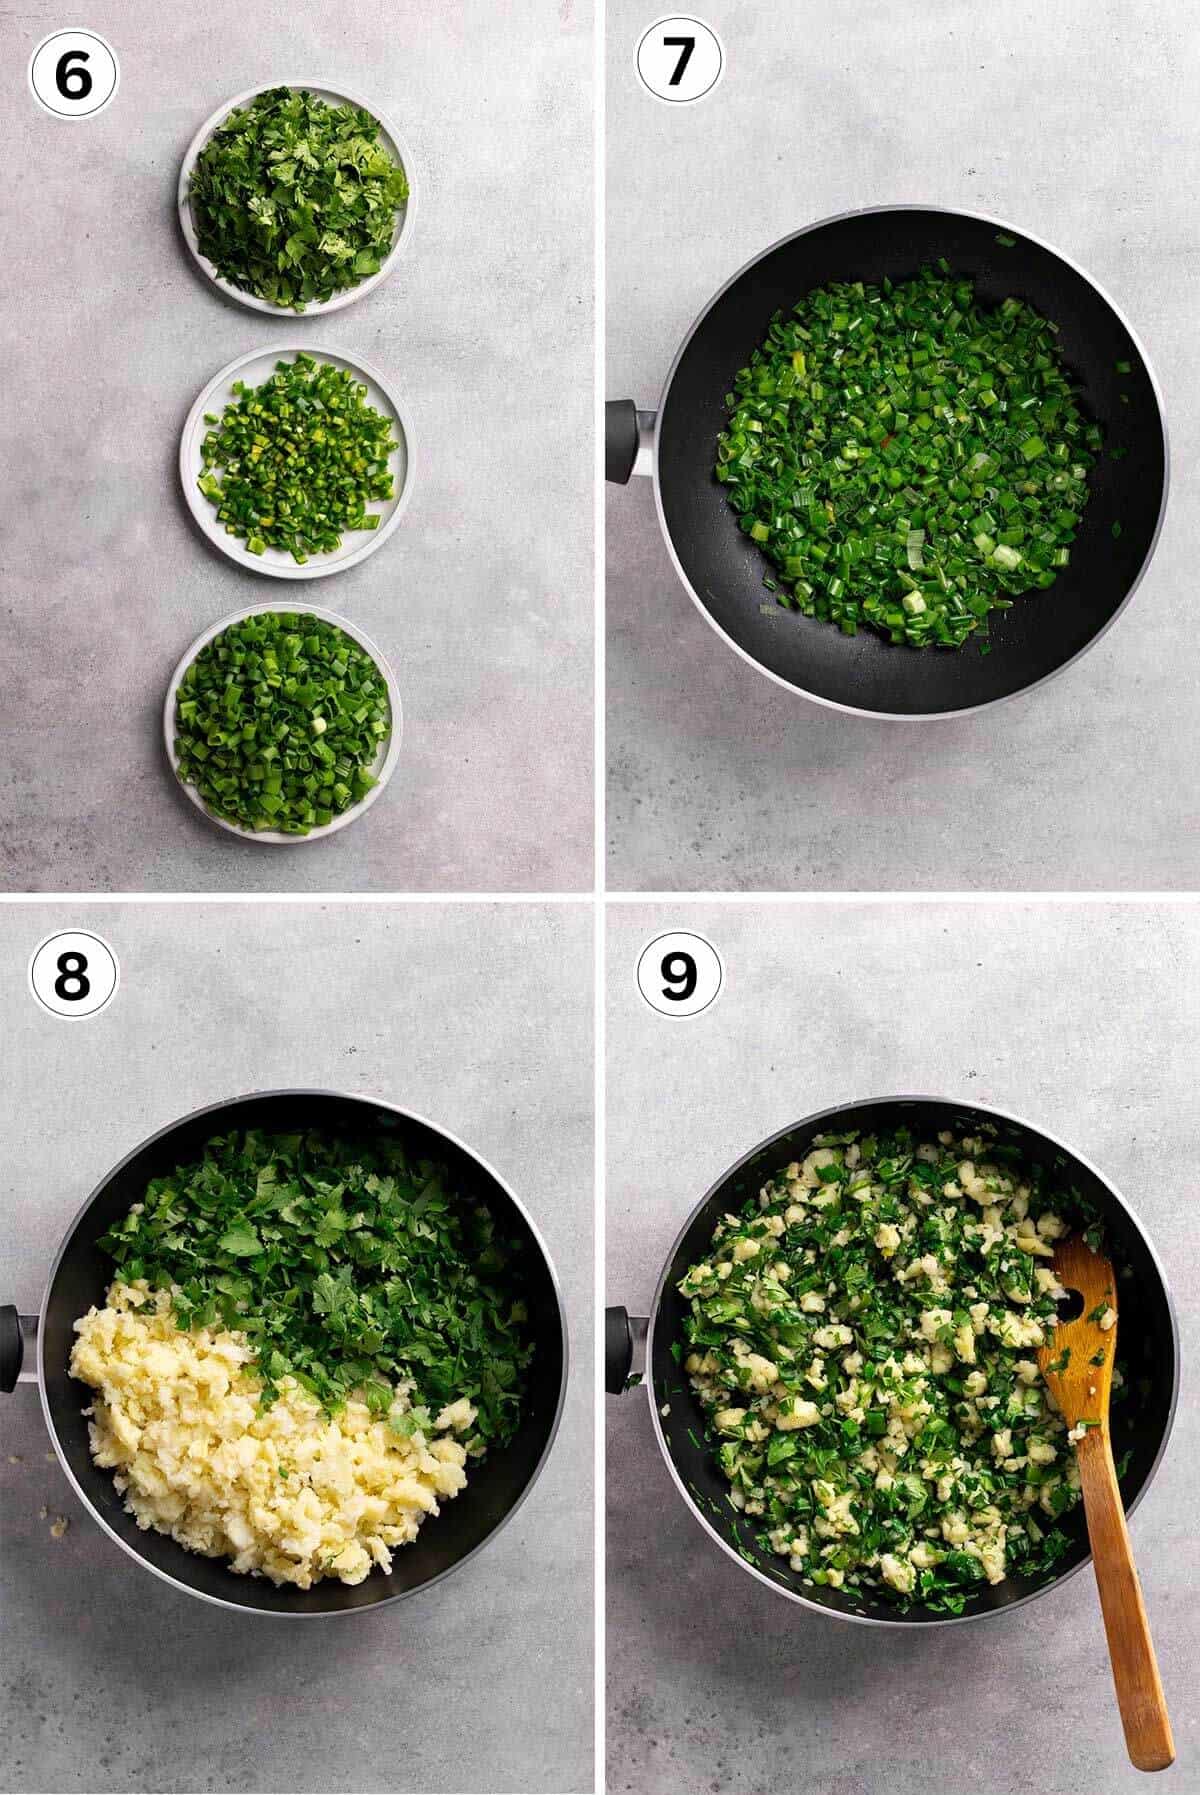 chopped cilantro, chili peppers, and green onion on plates, a pan showing how to cook the ingredients.